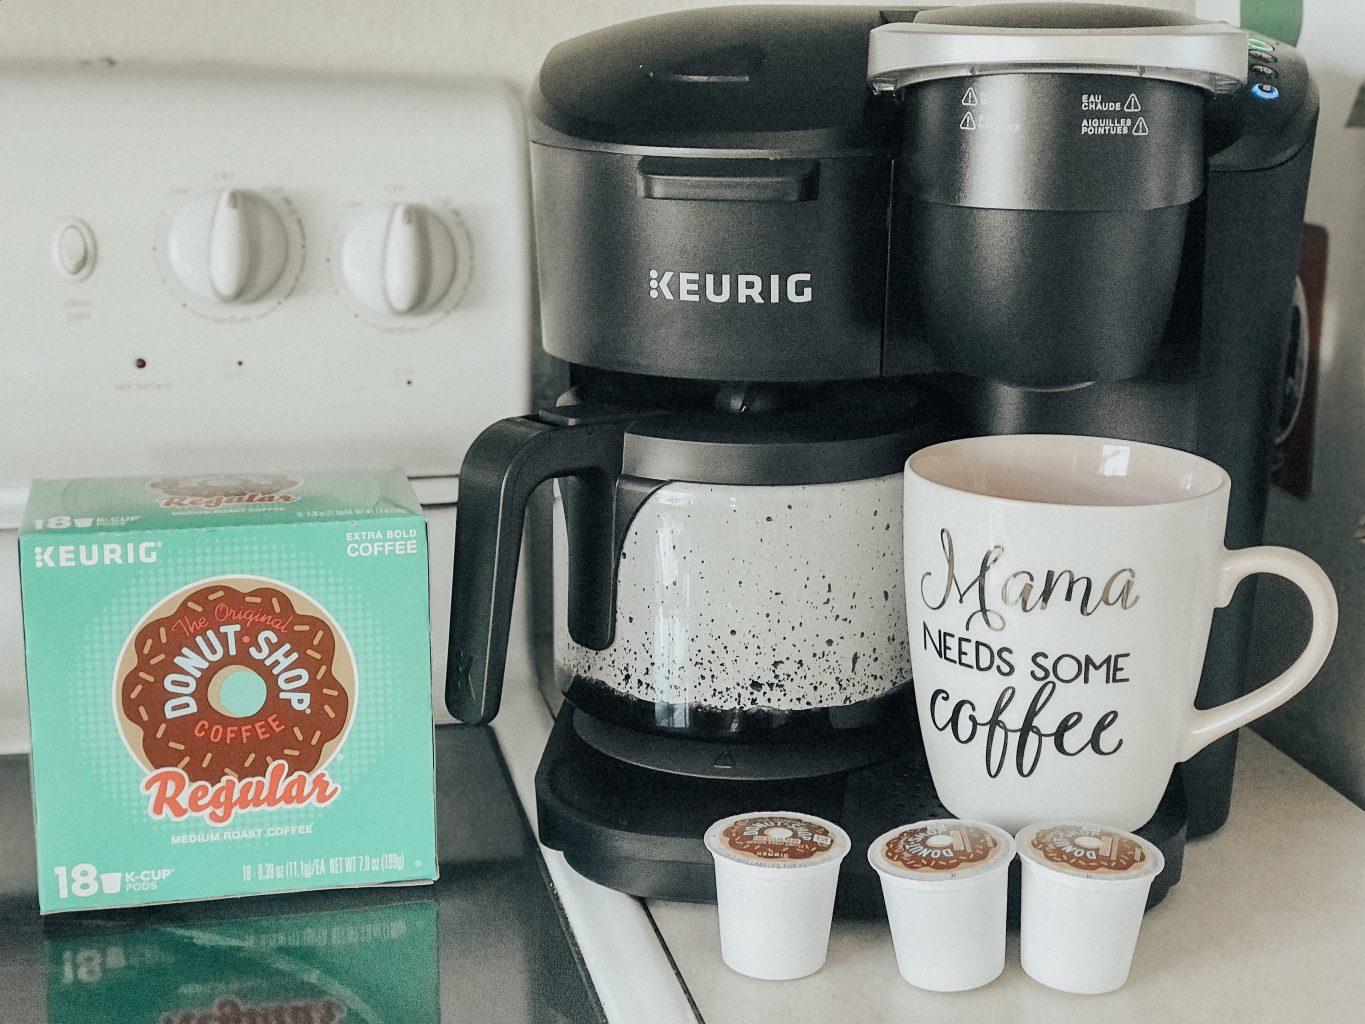 k-duo essentials coffee maker for morning routines